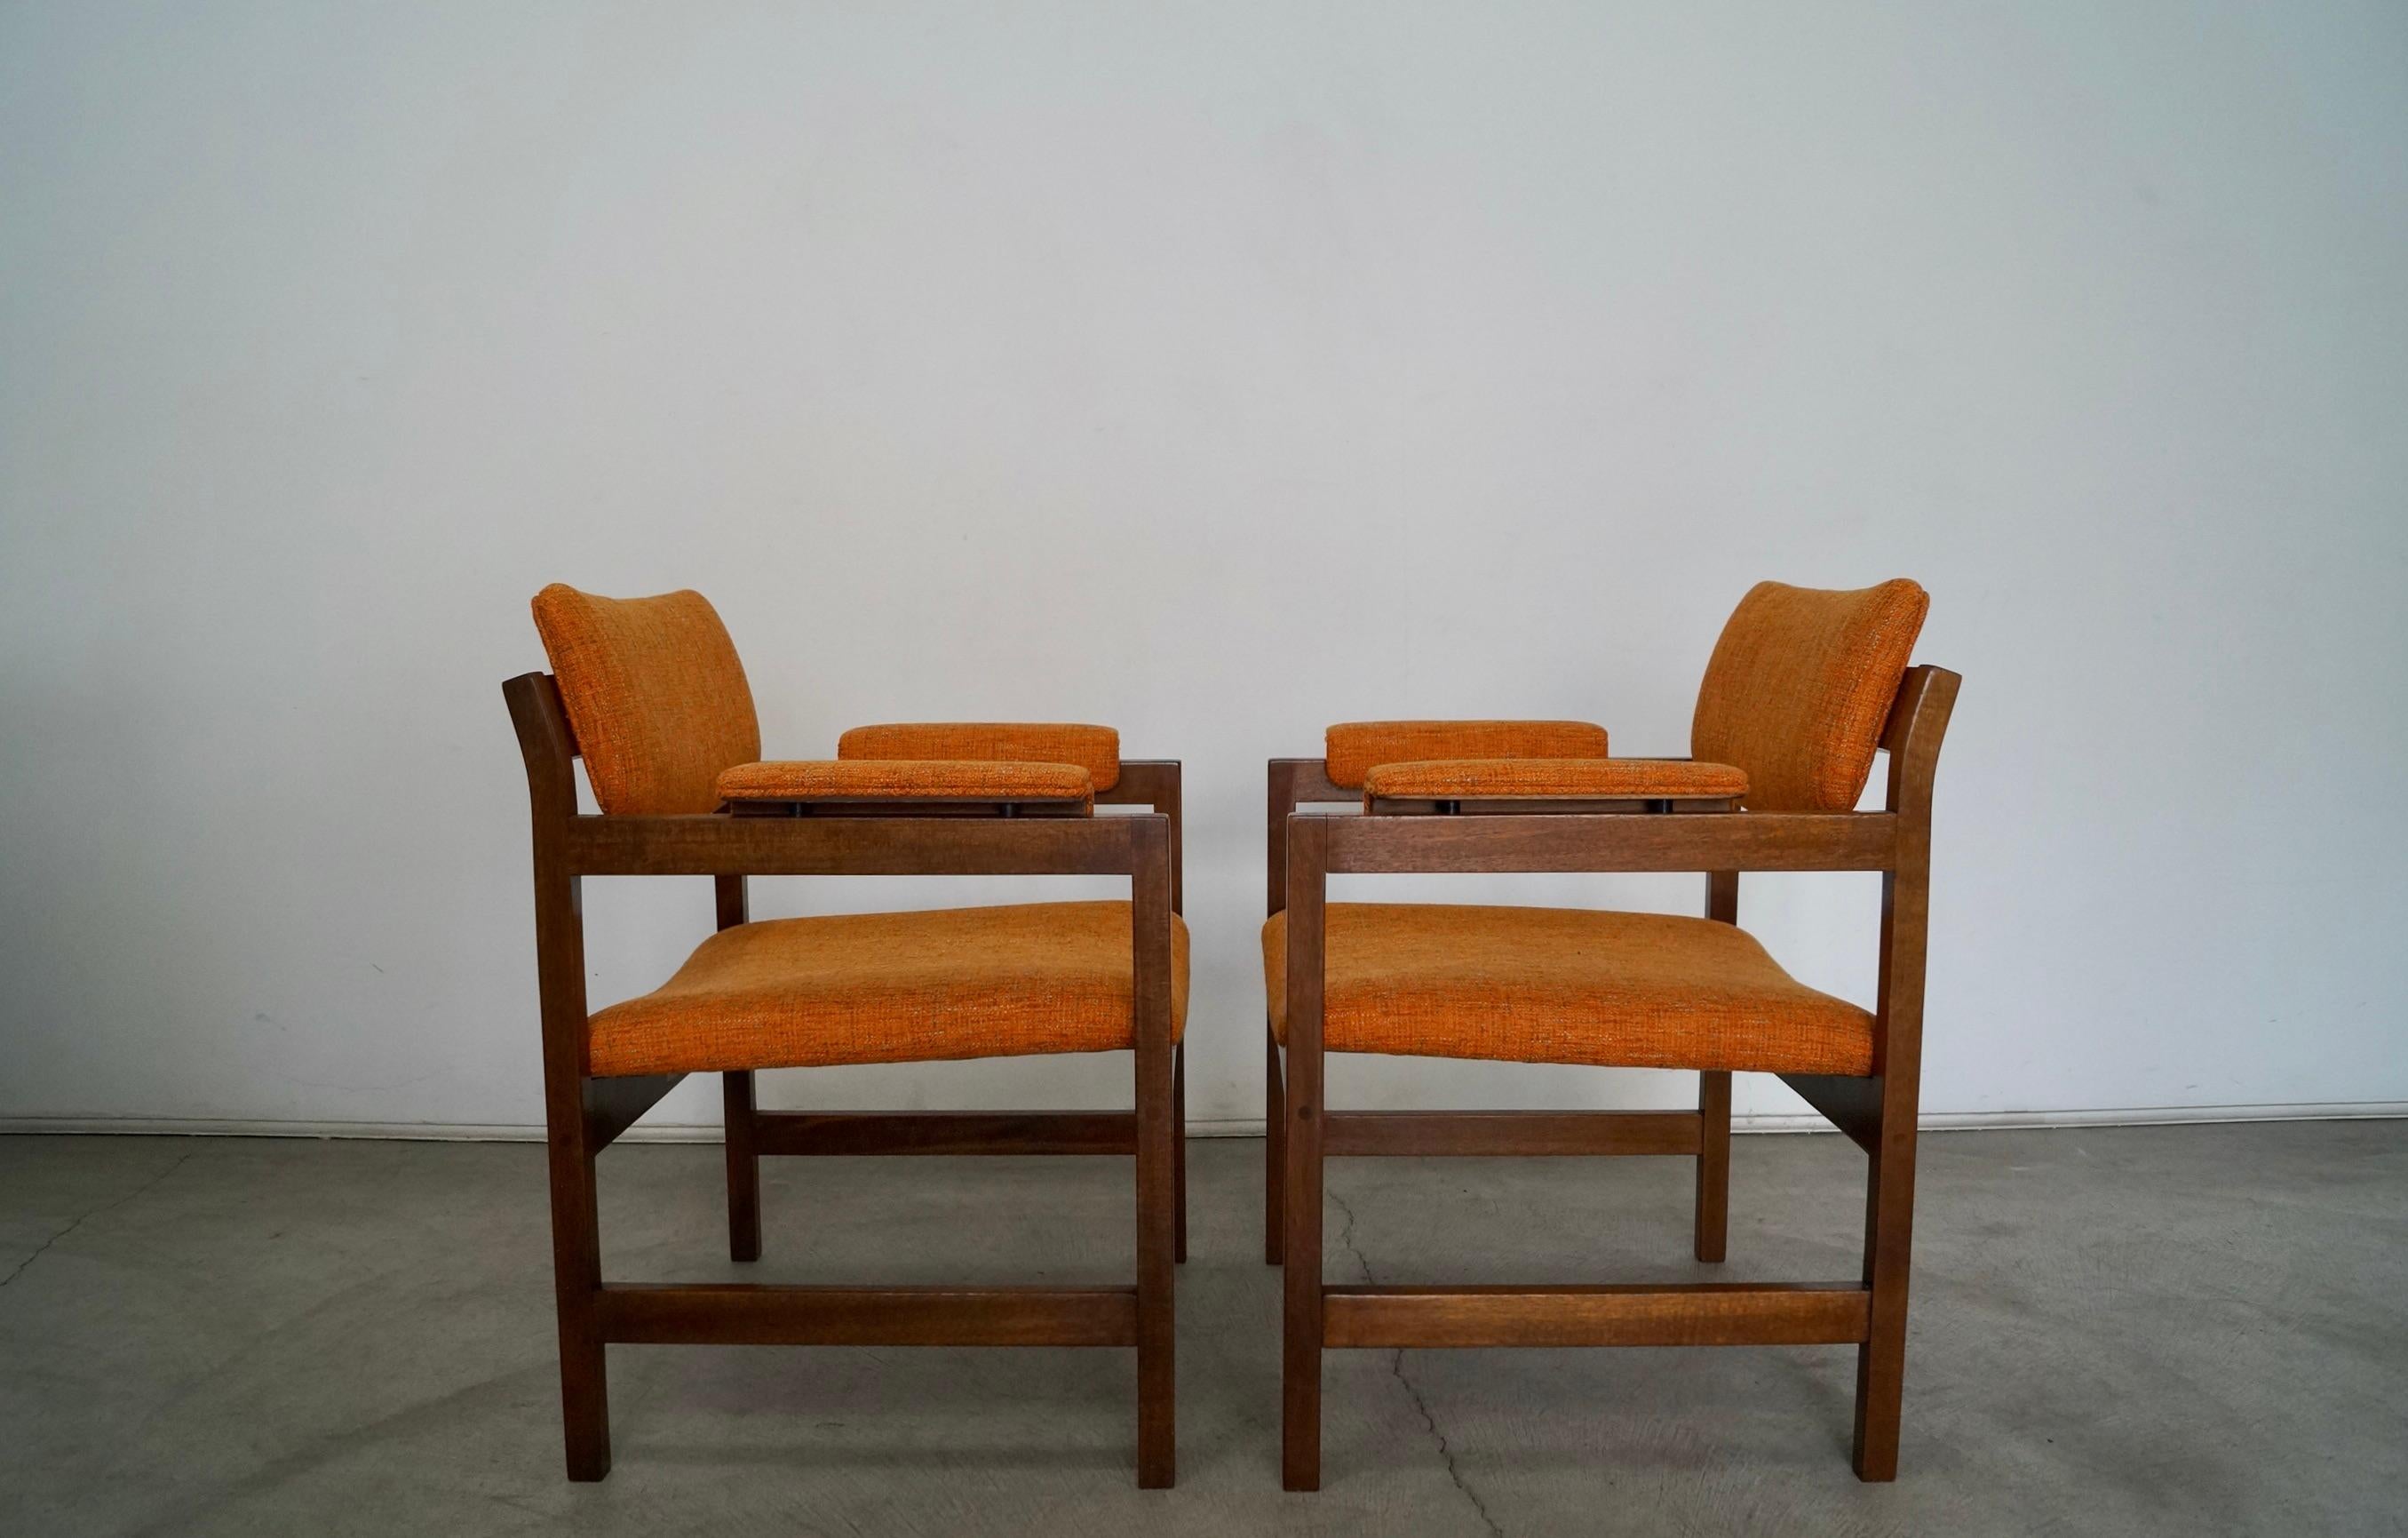 Pair of 1960s Mid-Century Modern Armchairs in Knoll Fabric For Sale 4